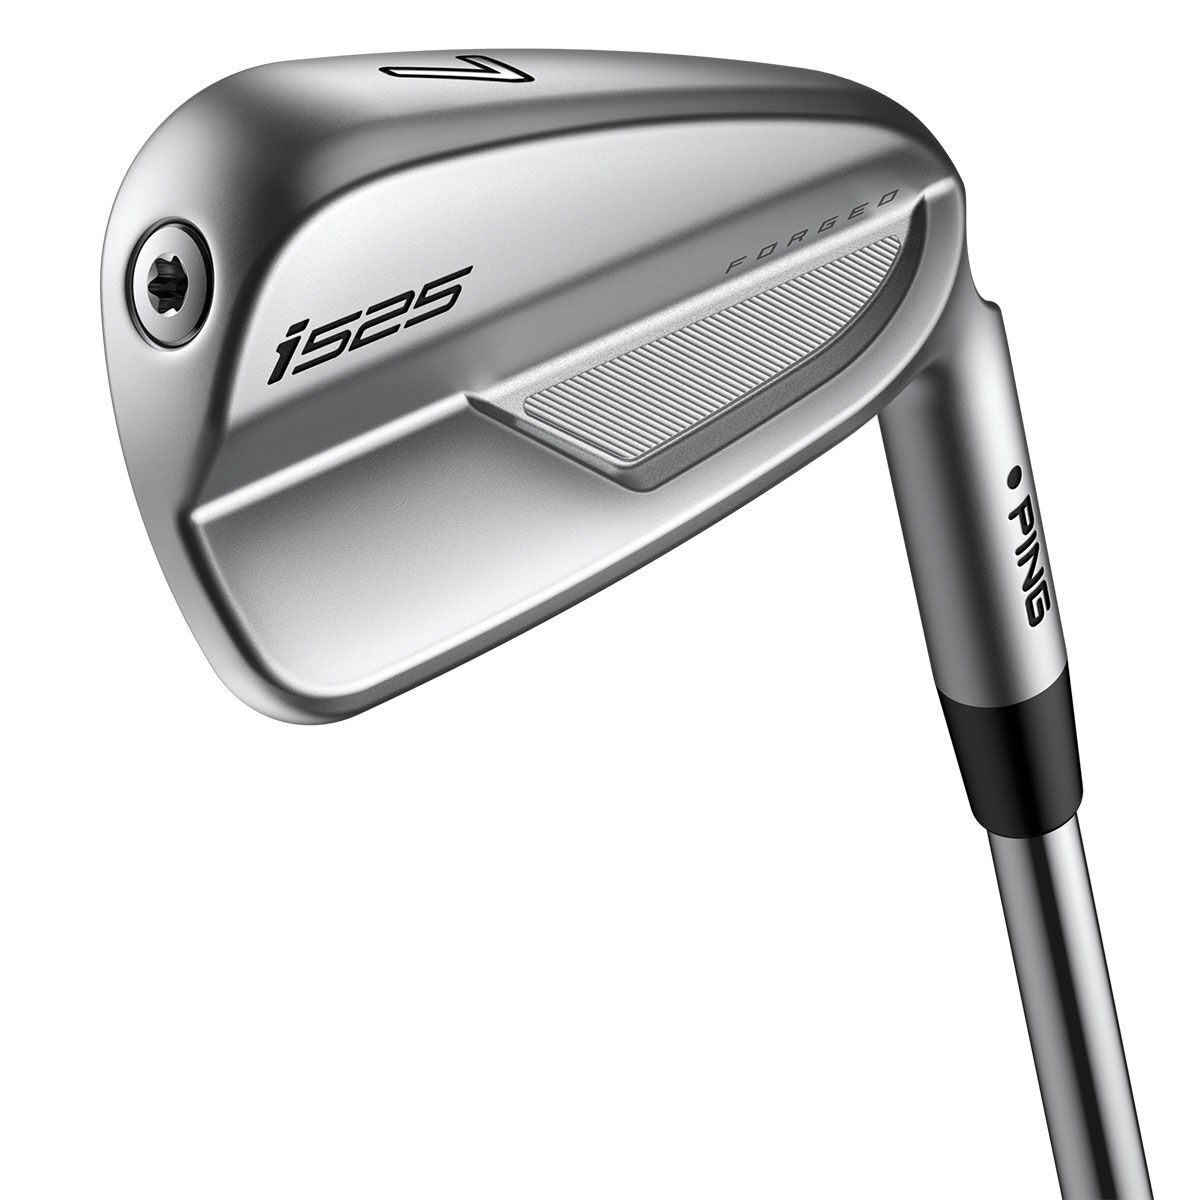 Ping Black and Silver I525 Graphite Custom Fit Golf Irons| American Golf, One Size von Ping